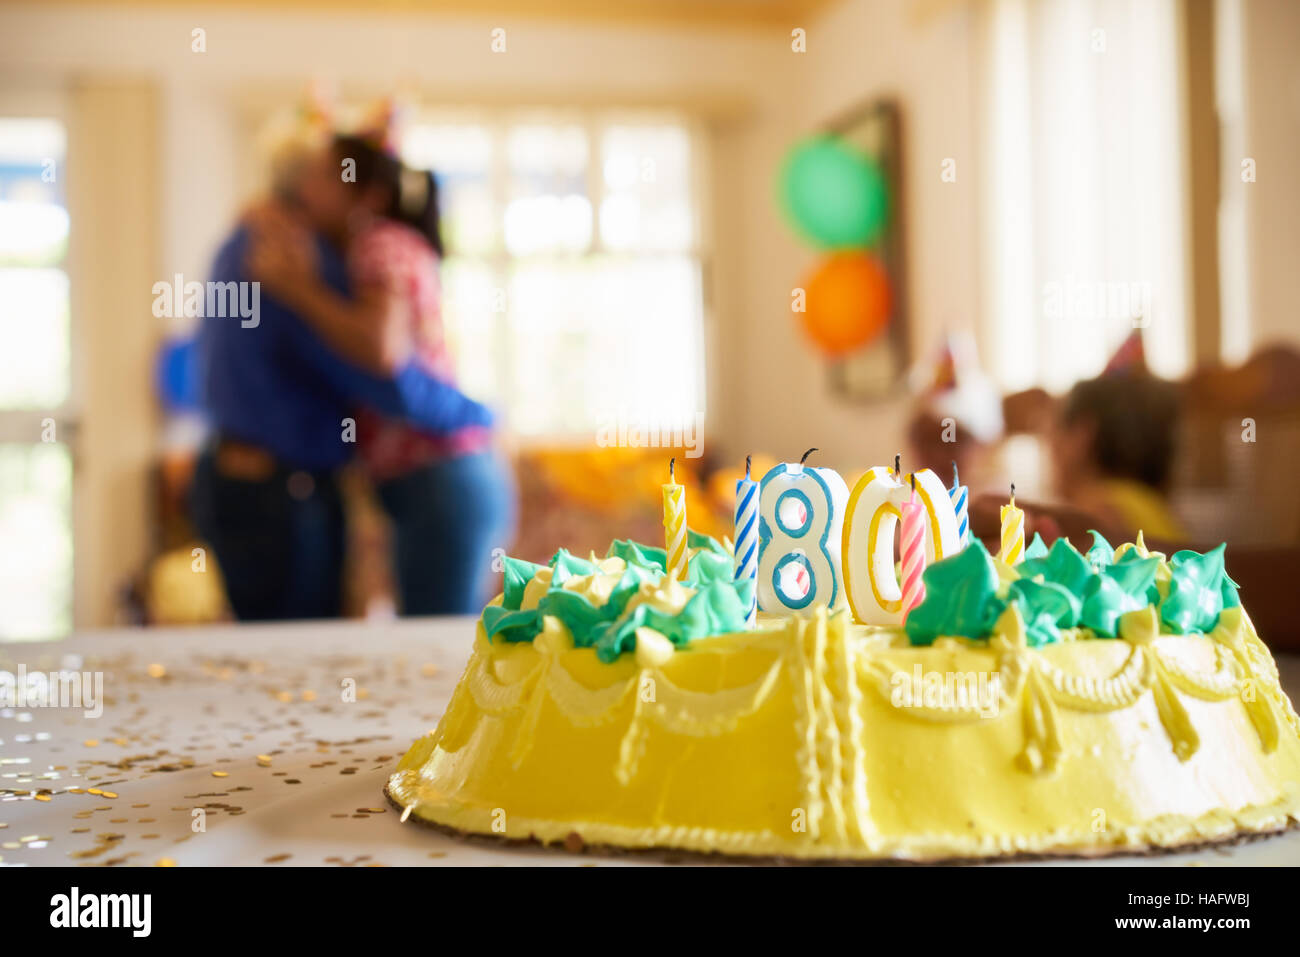 Woman embracing her senior dad at birthday party, celebrating his eighty years in retirement home. Focus on cake on table. Stock Photo